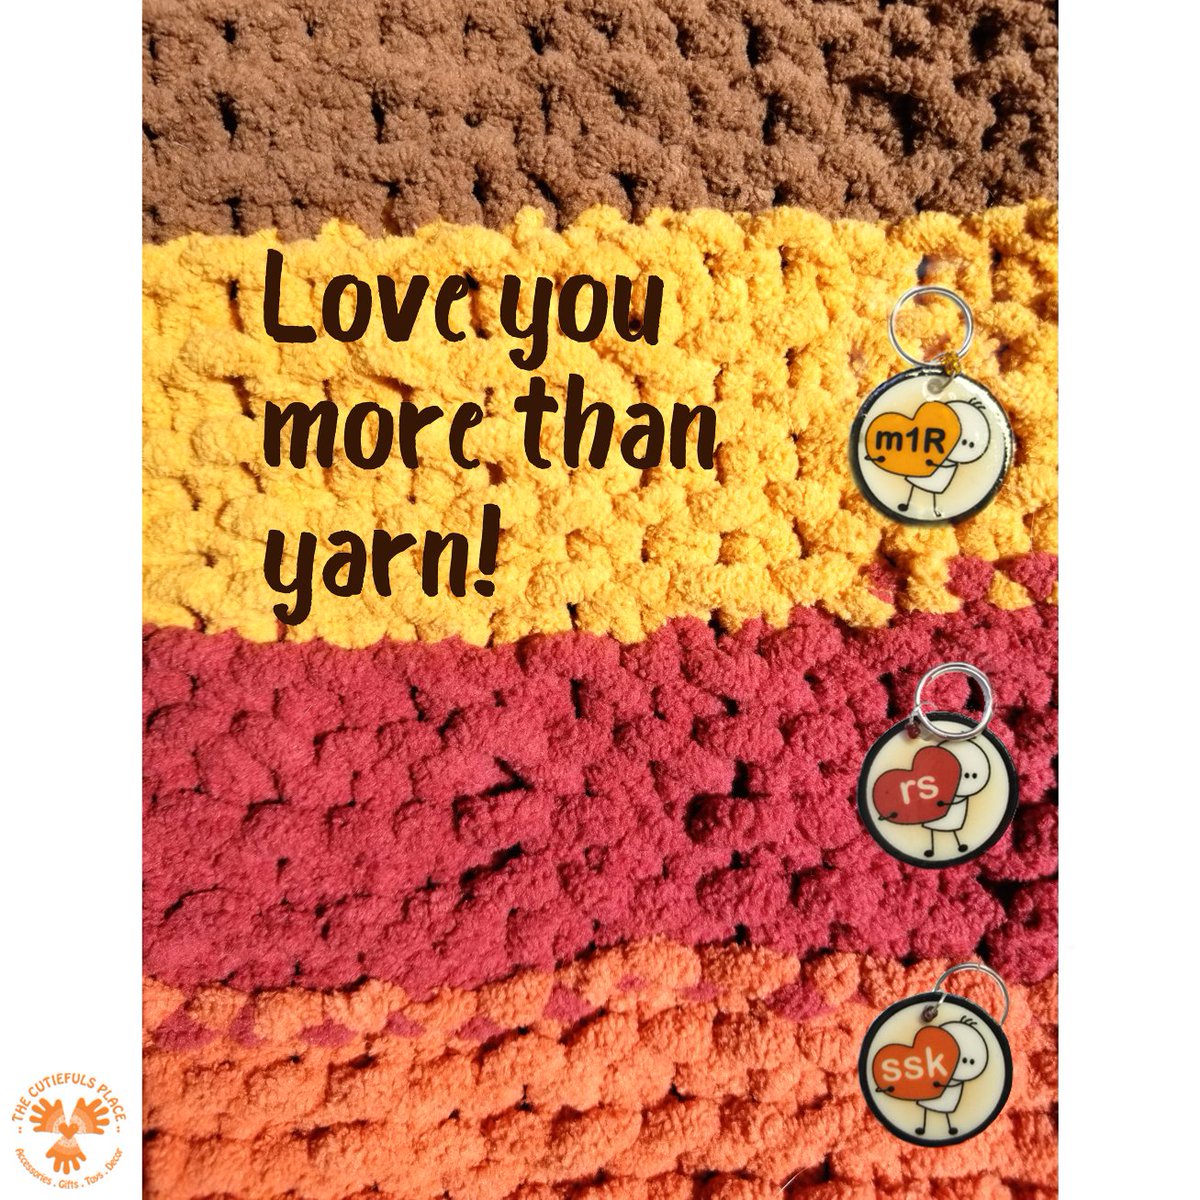 Almost done with a lap blanket for my friend Amy, who is getting married in a couple of weeks: shall this blanket snuggle them together even more!

#WednesdayMotivation #WednesdayWisdom 
#knit #knittinglove
#etsy #knittingismyyoga 
#knittingnotions 👉 ow.ly/6a5K50uNDvY